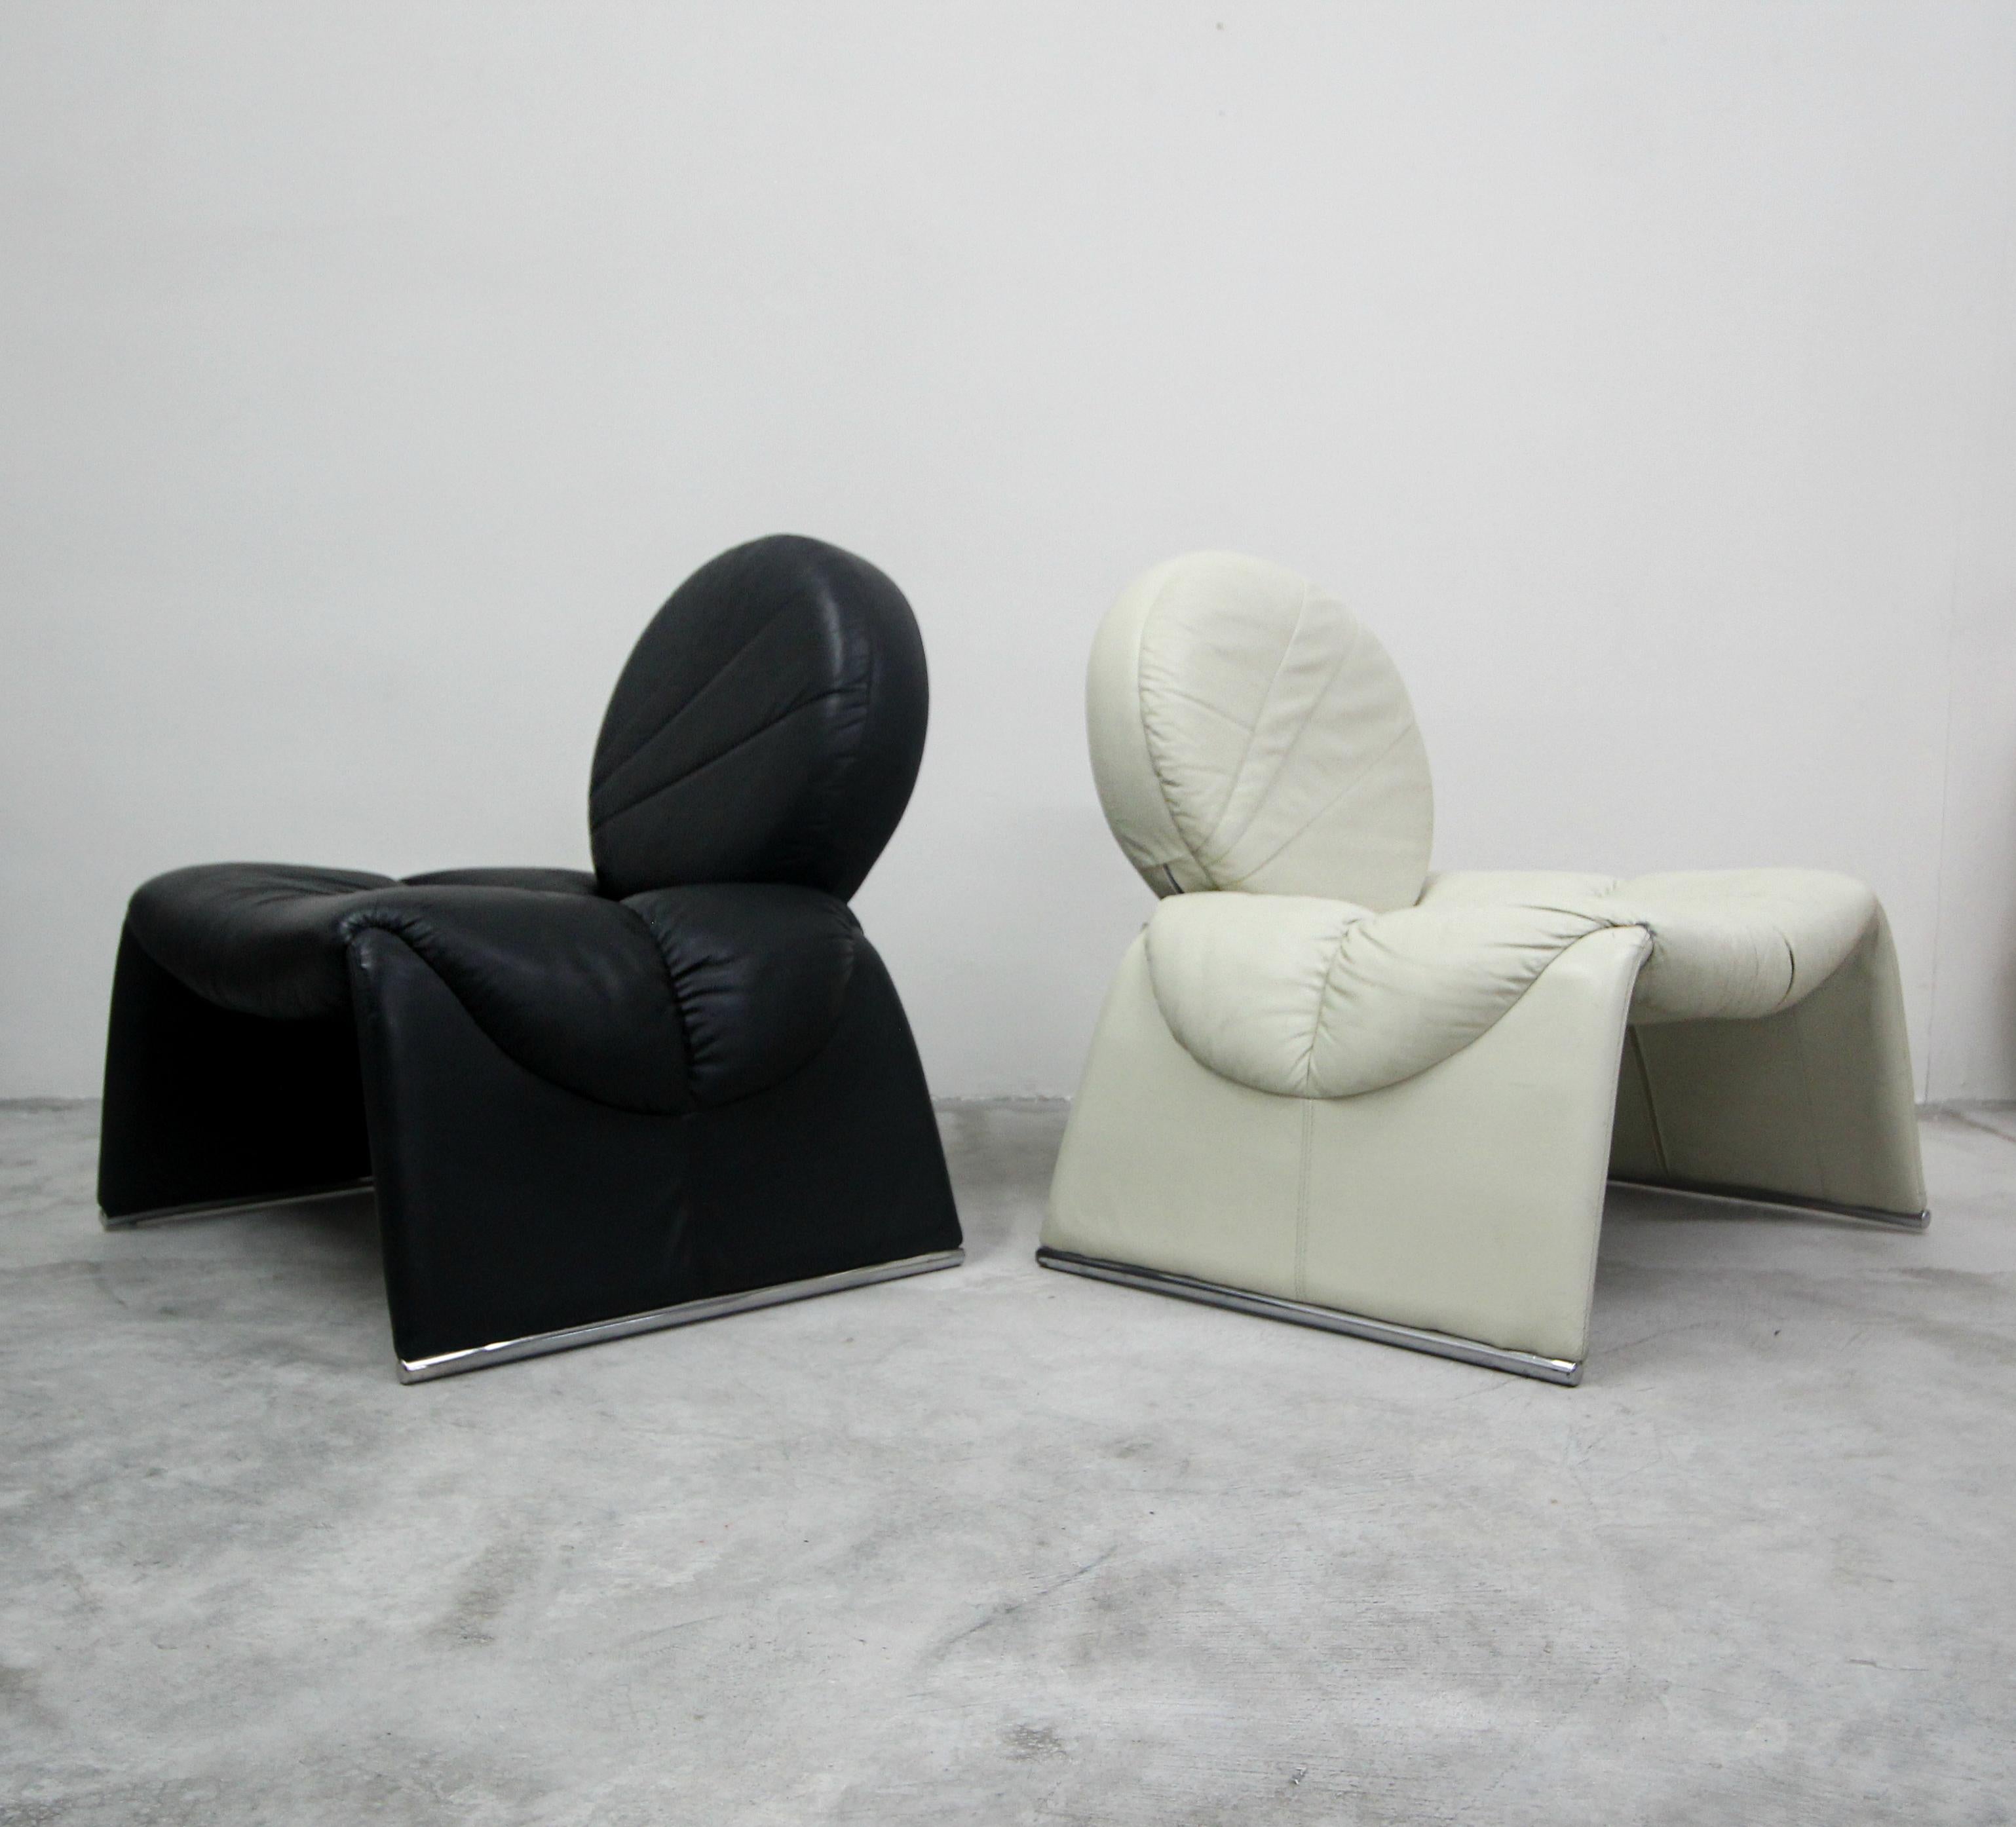 20th Century Pair of Black and White Leather Vintage Italian Lounge Chairs